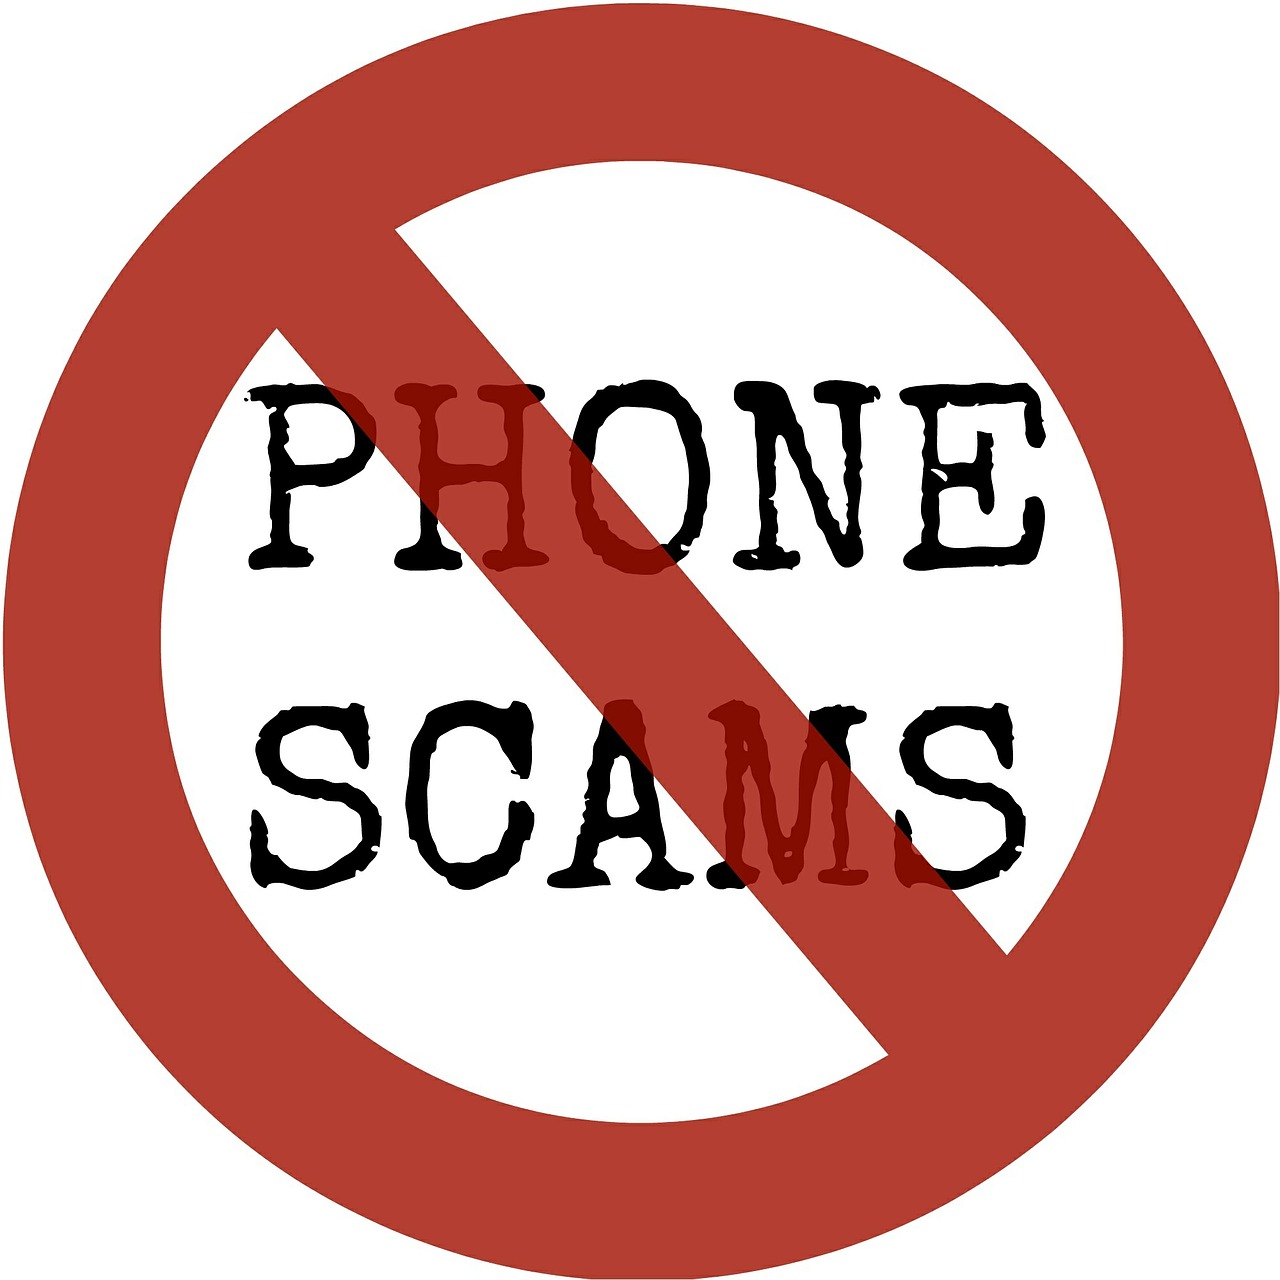 phone scams fraud free photo